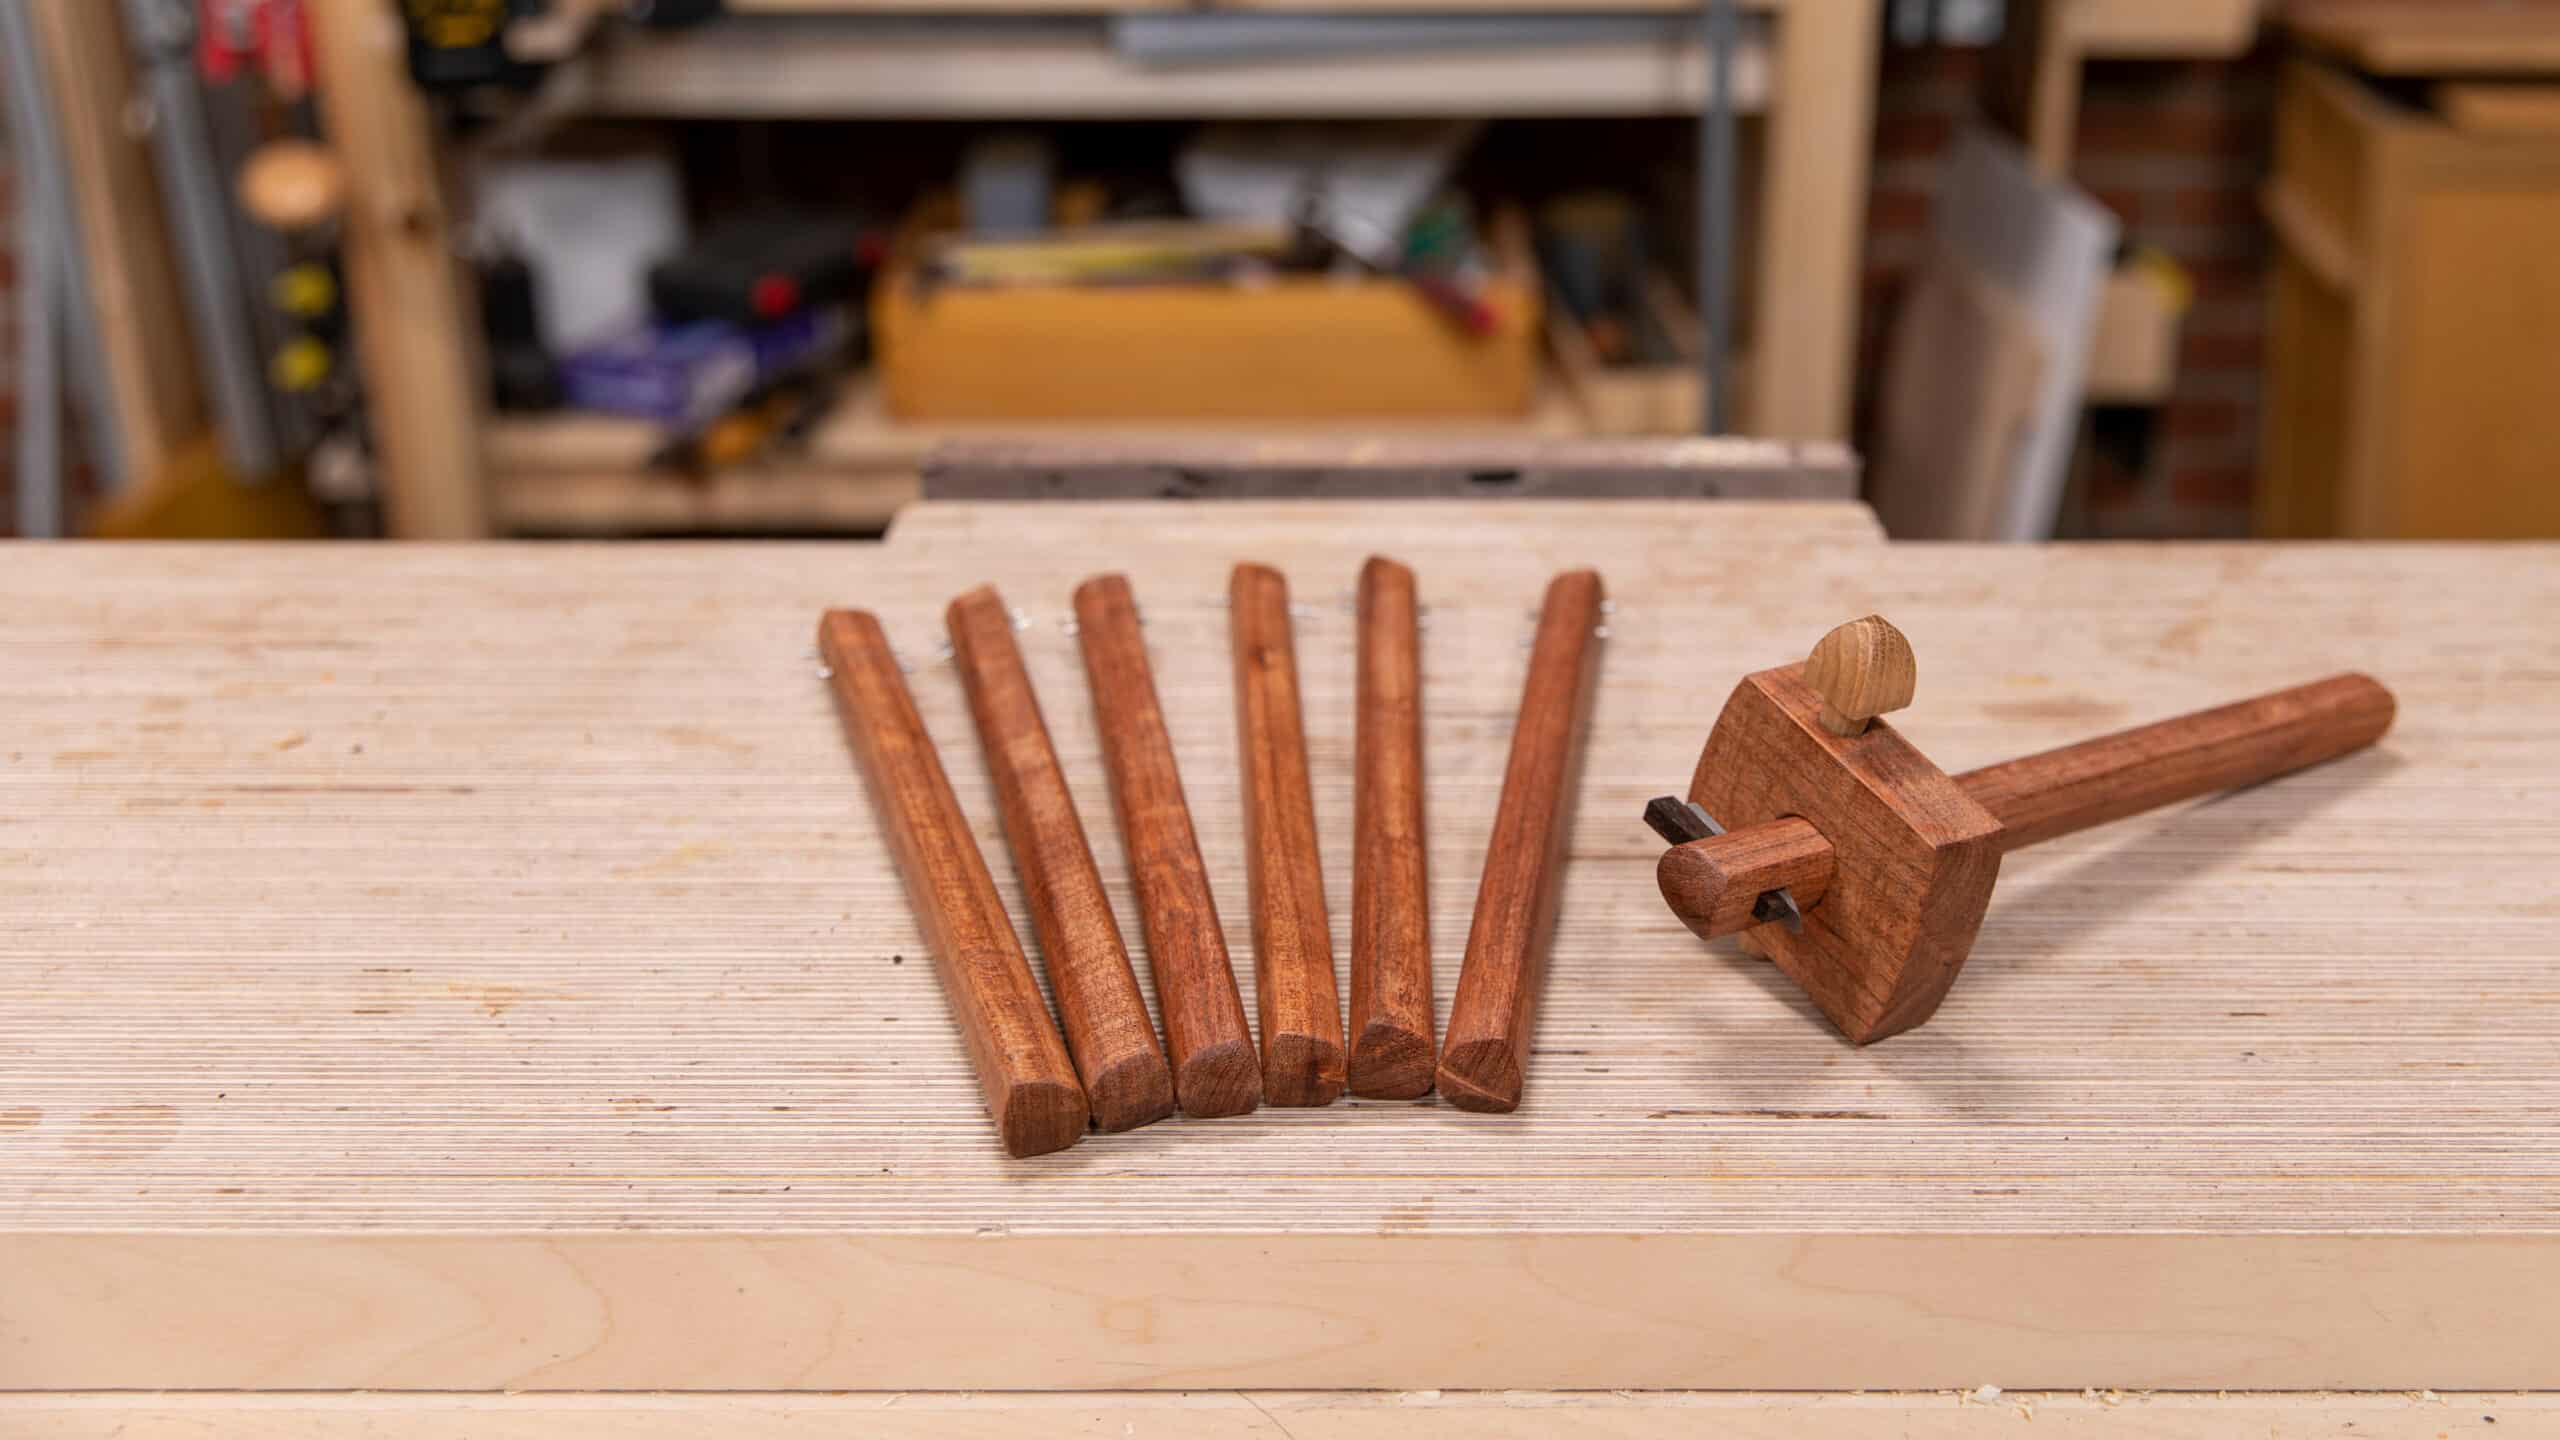 This Odd Woodworking Tool Is Packed With 15 Features, Odd Job